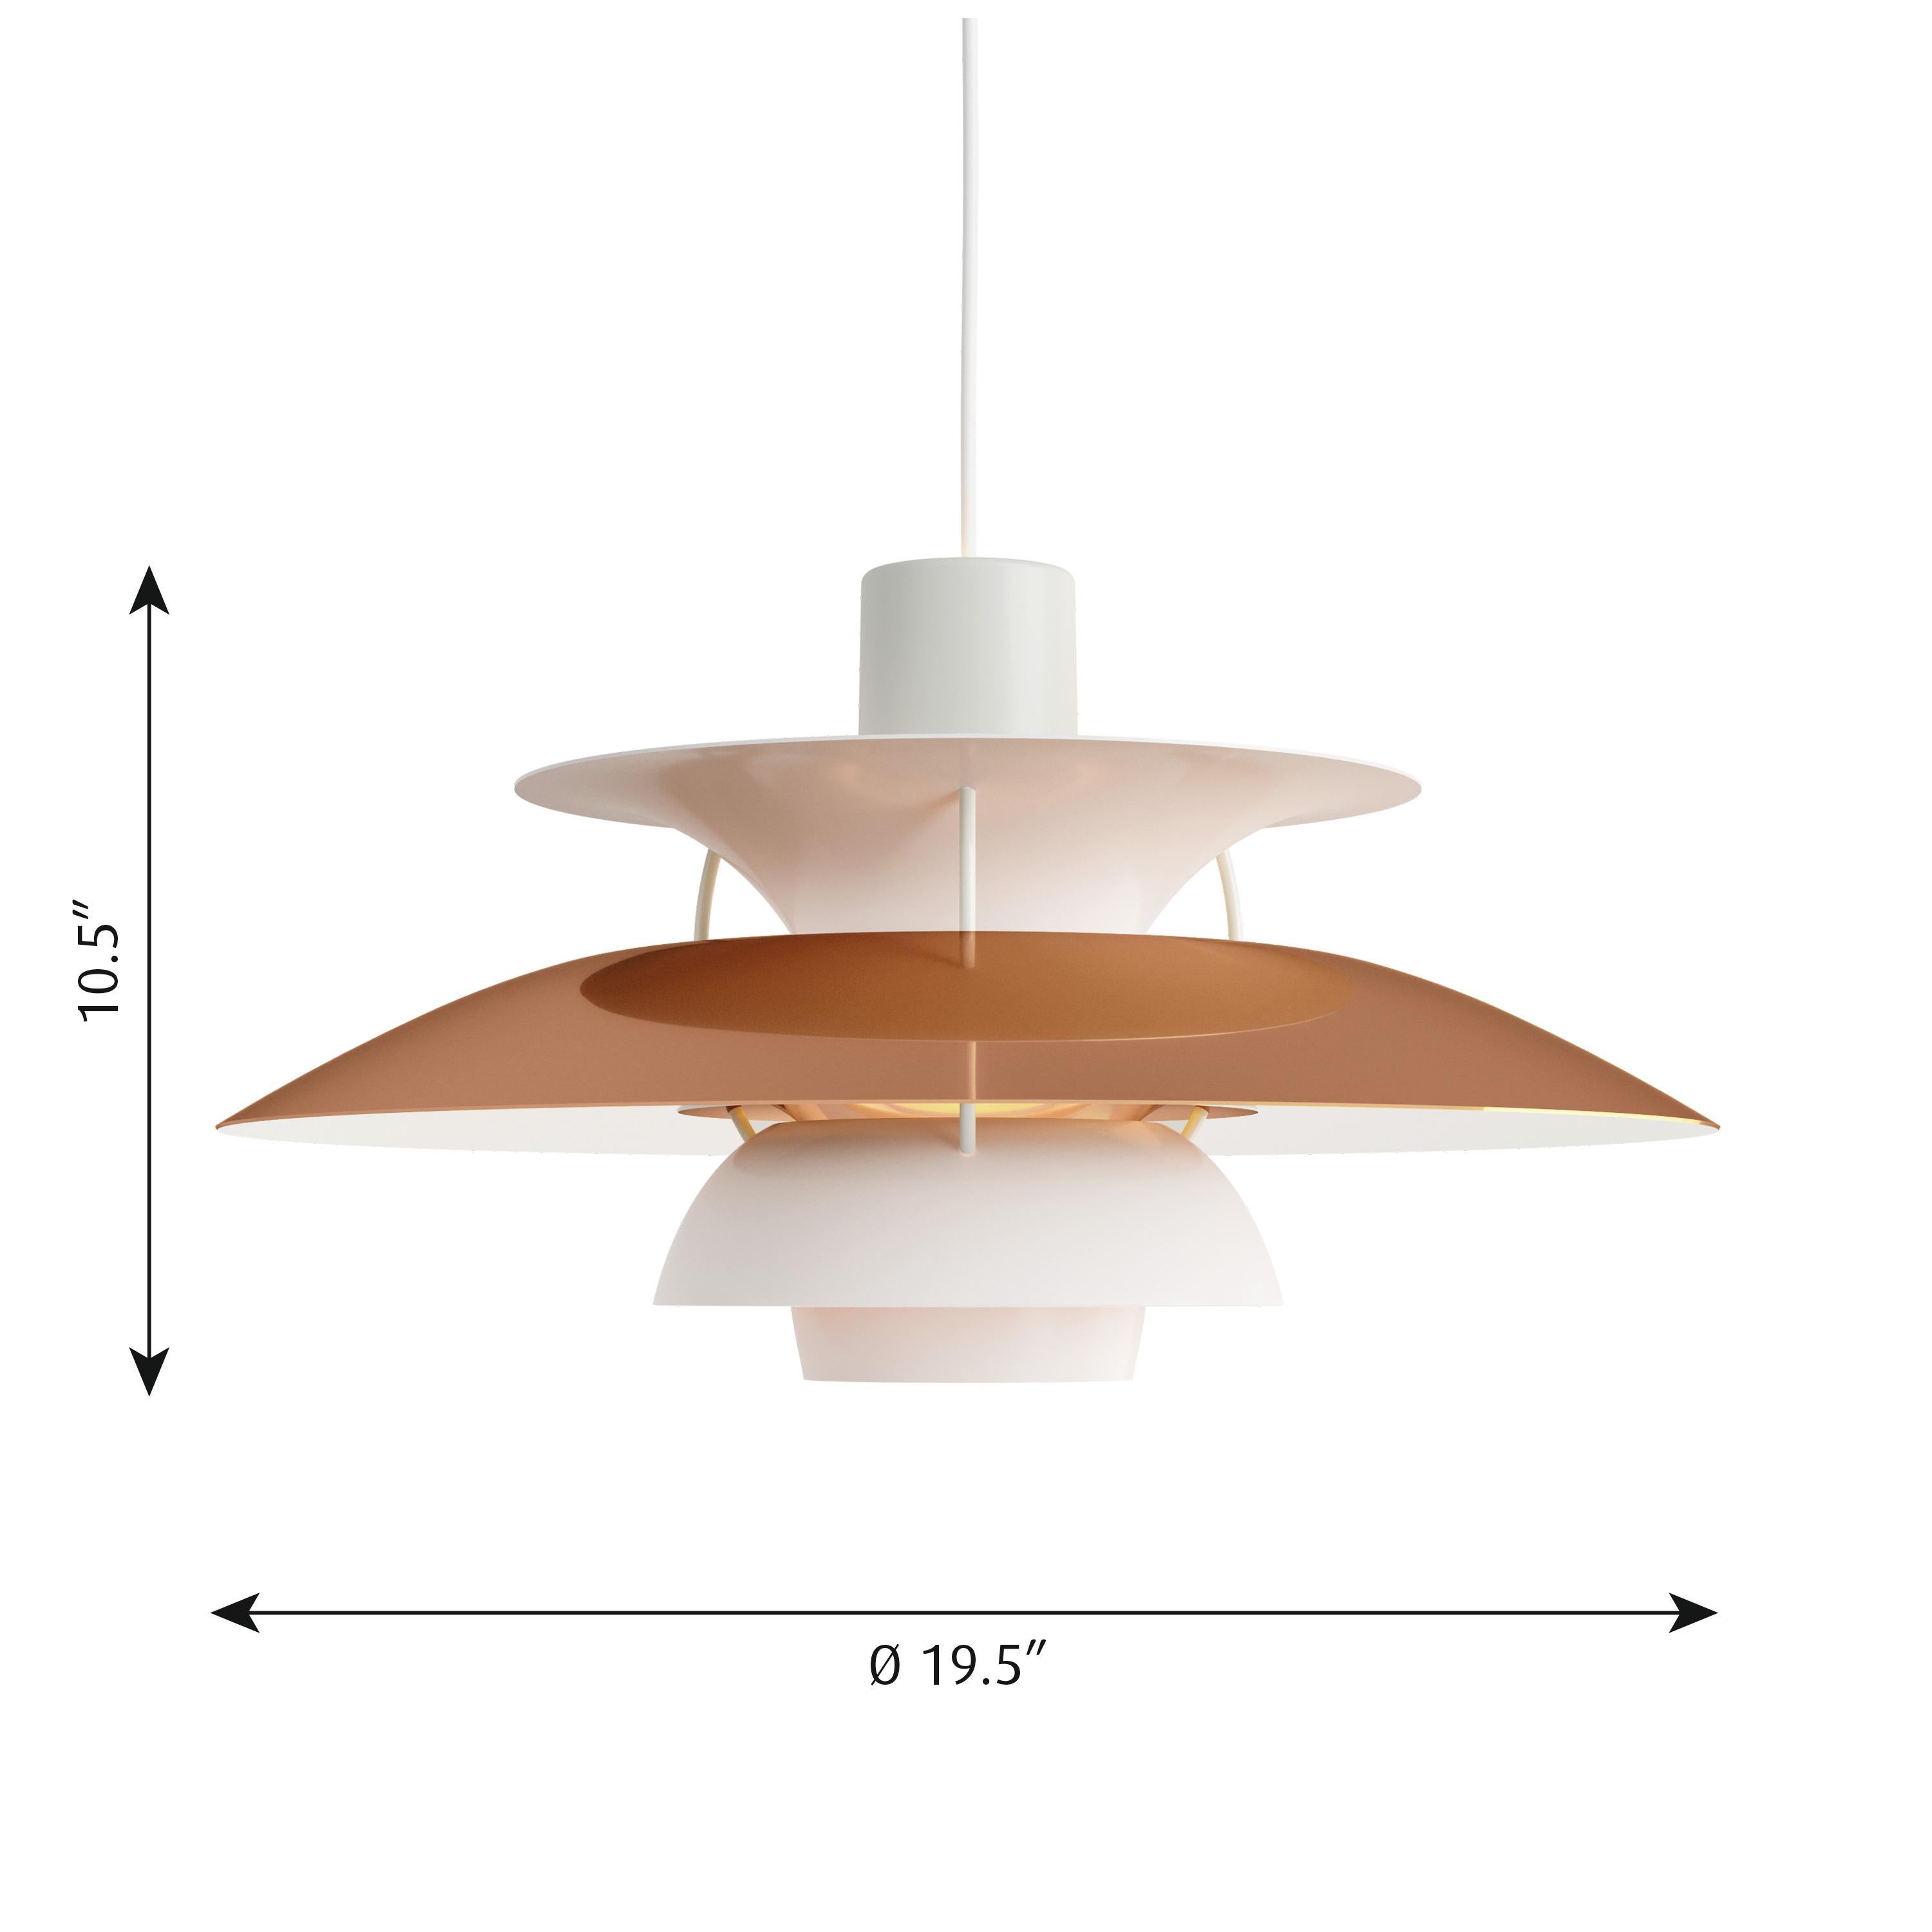 Poul Henningsen PH 5 copper pendant for Louis Poulsen. Poul Henningsen introduced his iconic PH 5 pendant light in 1958. To celebrate, Louis Poulsen is putting out this special 60th Anniversary edition in copper. Six decades later, the PH 5 remains